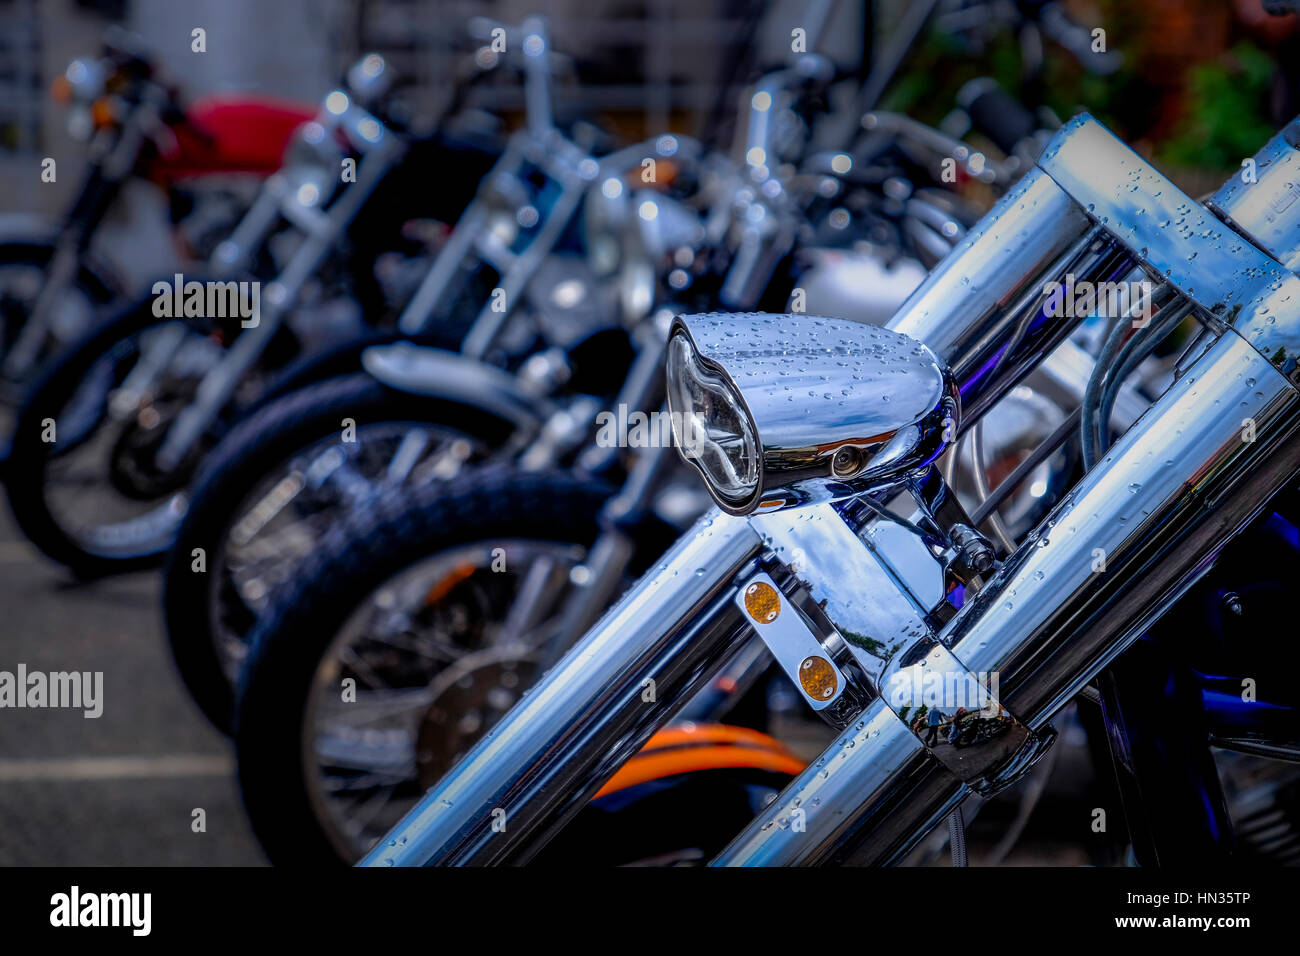 Motorcycles parked at a bikers event. Stock Photo